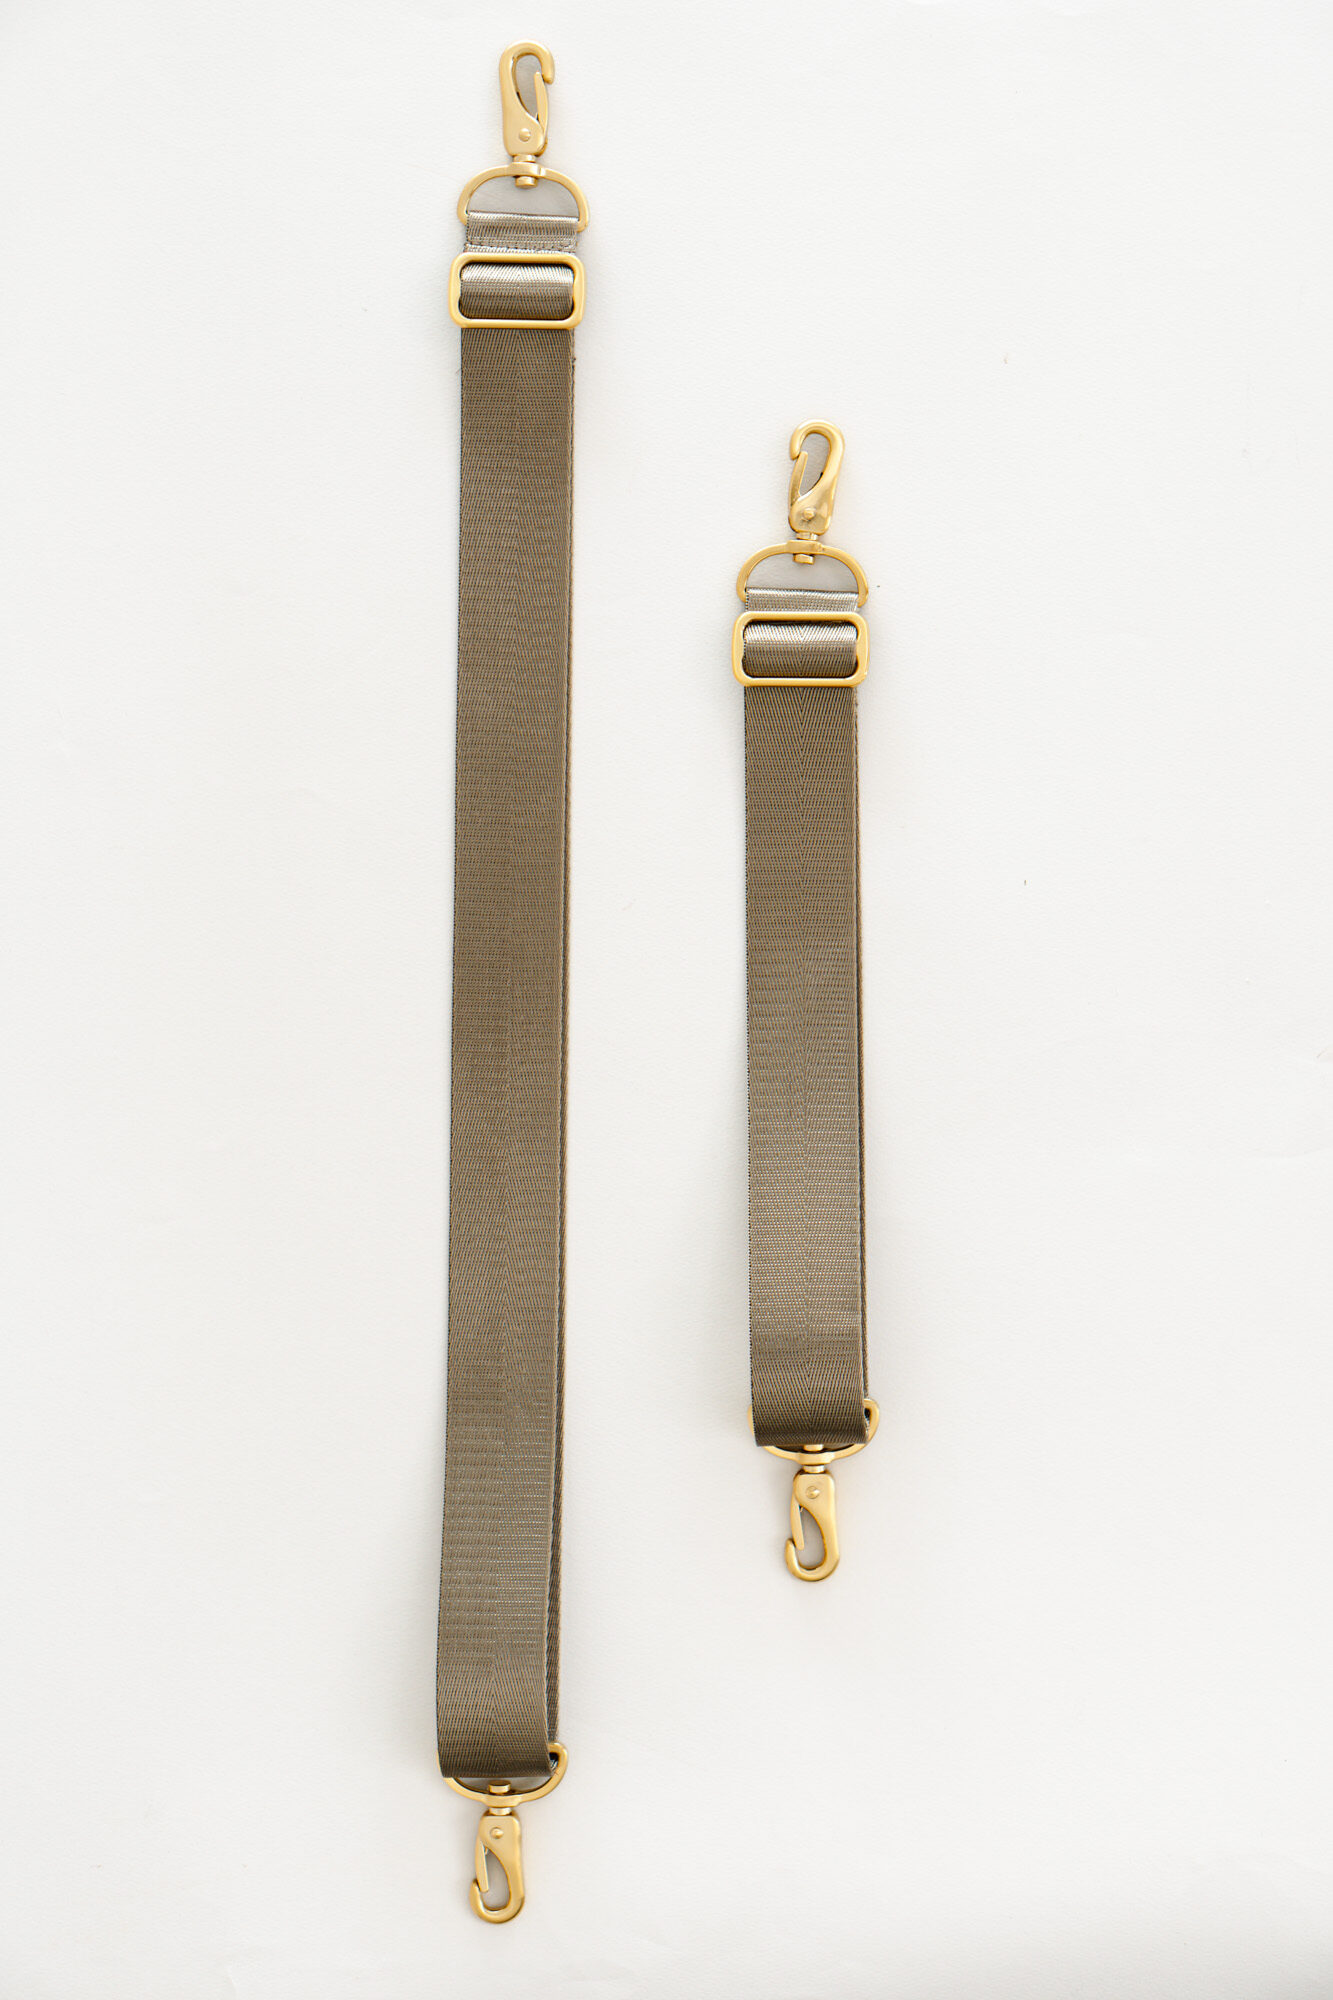 Removable bag strap in taup with gold metal parts ind long and short